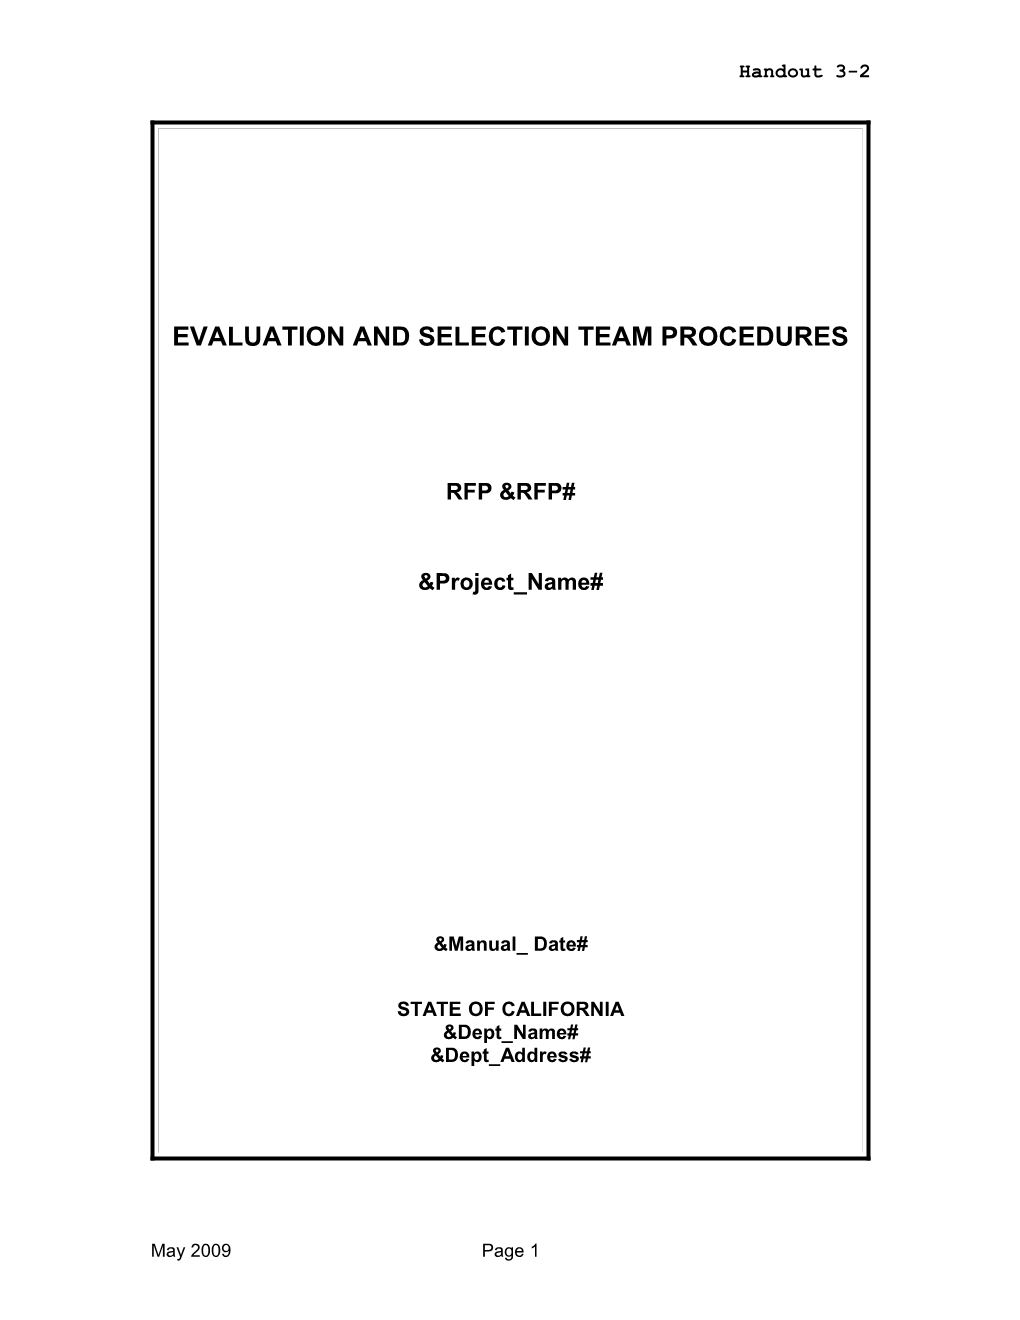 Evaluation and Selection Team Procedures for